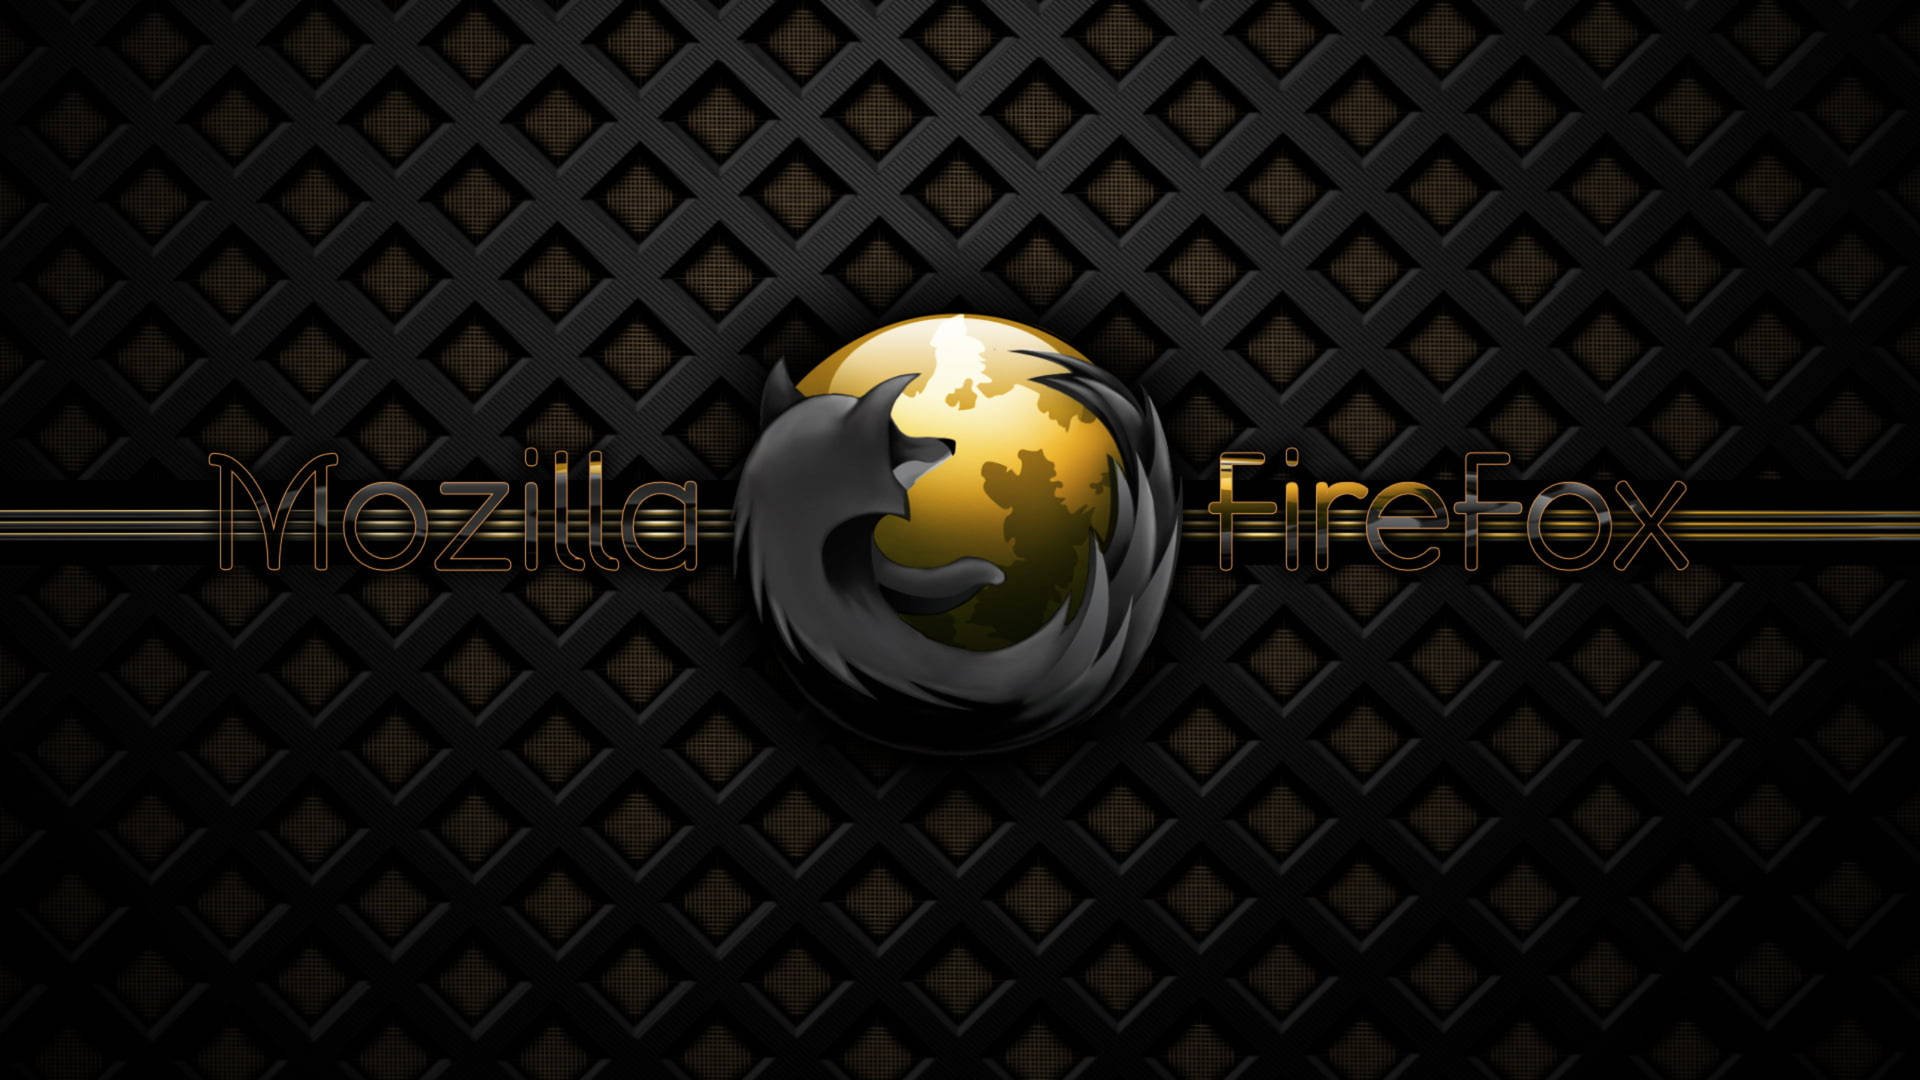 Mozilla Firefox In Black And Gold Wallpaper